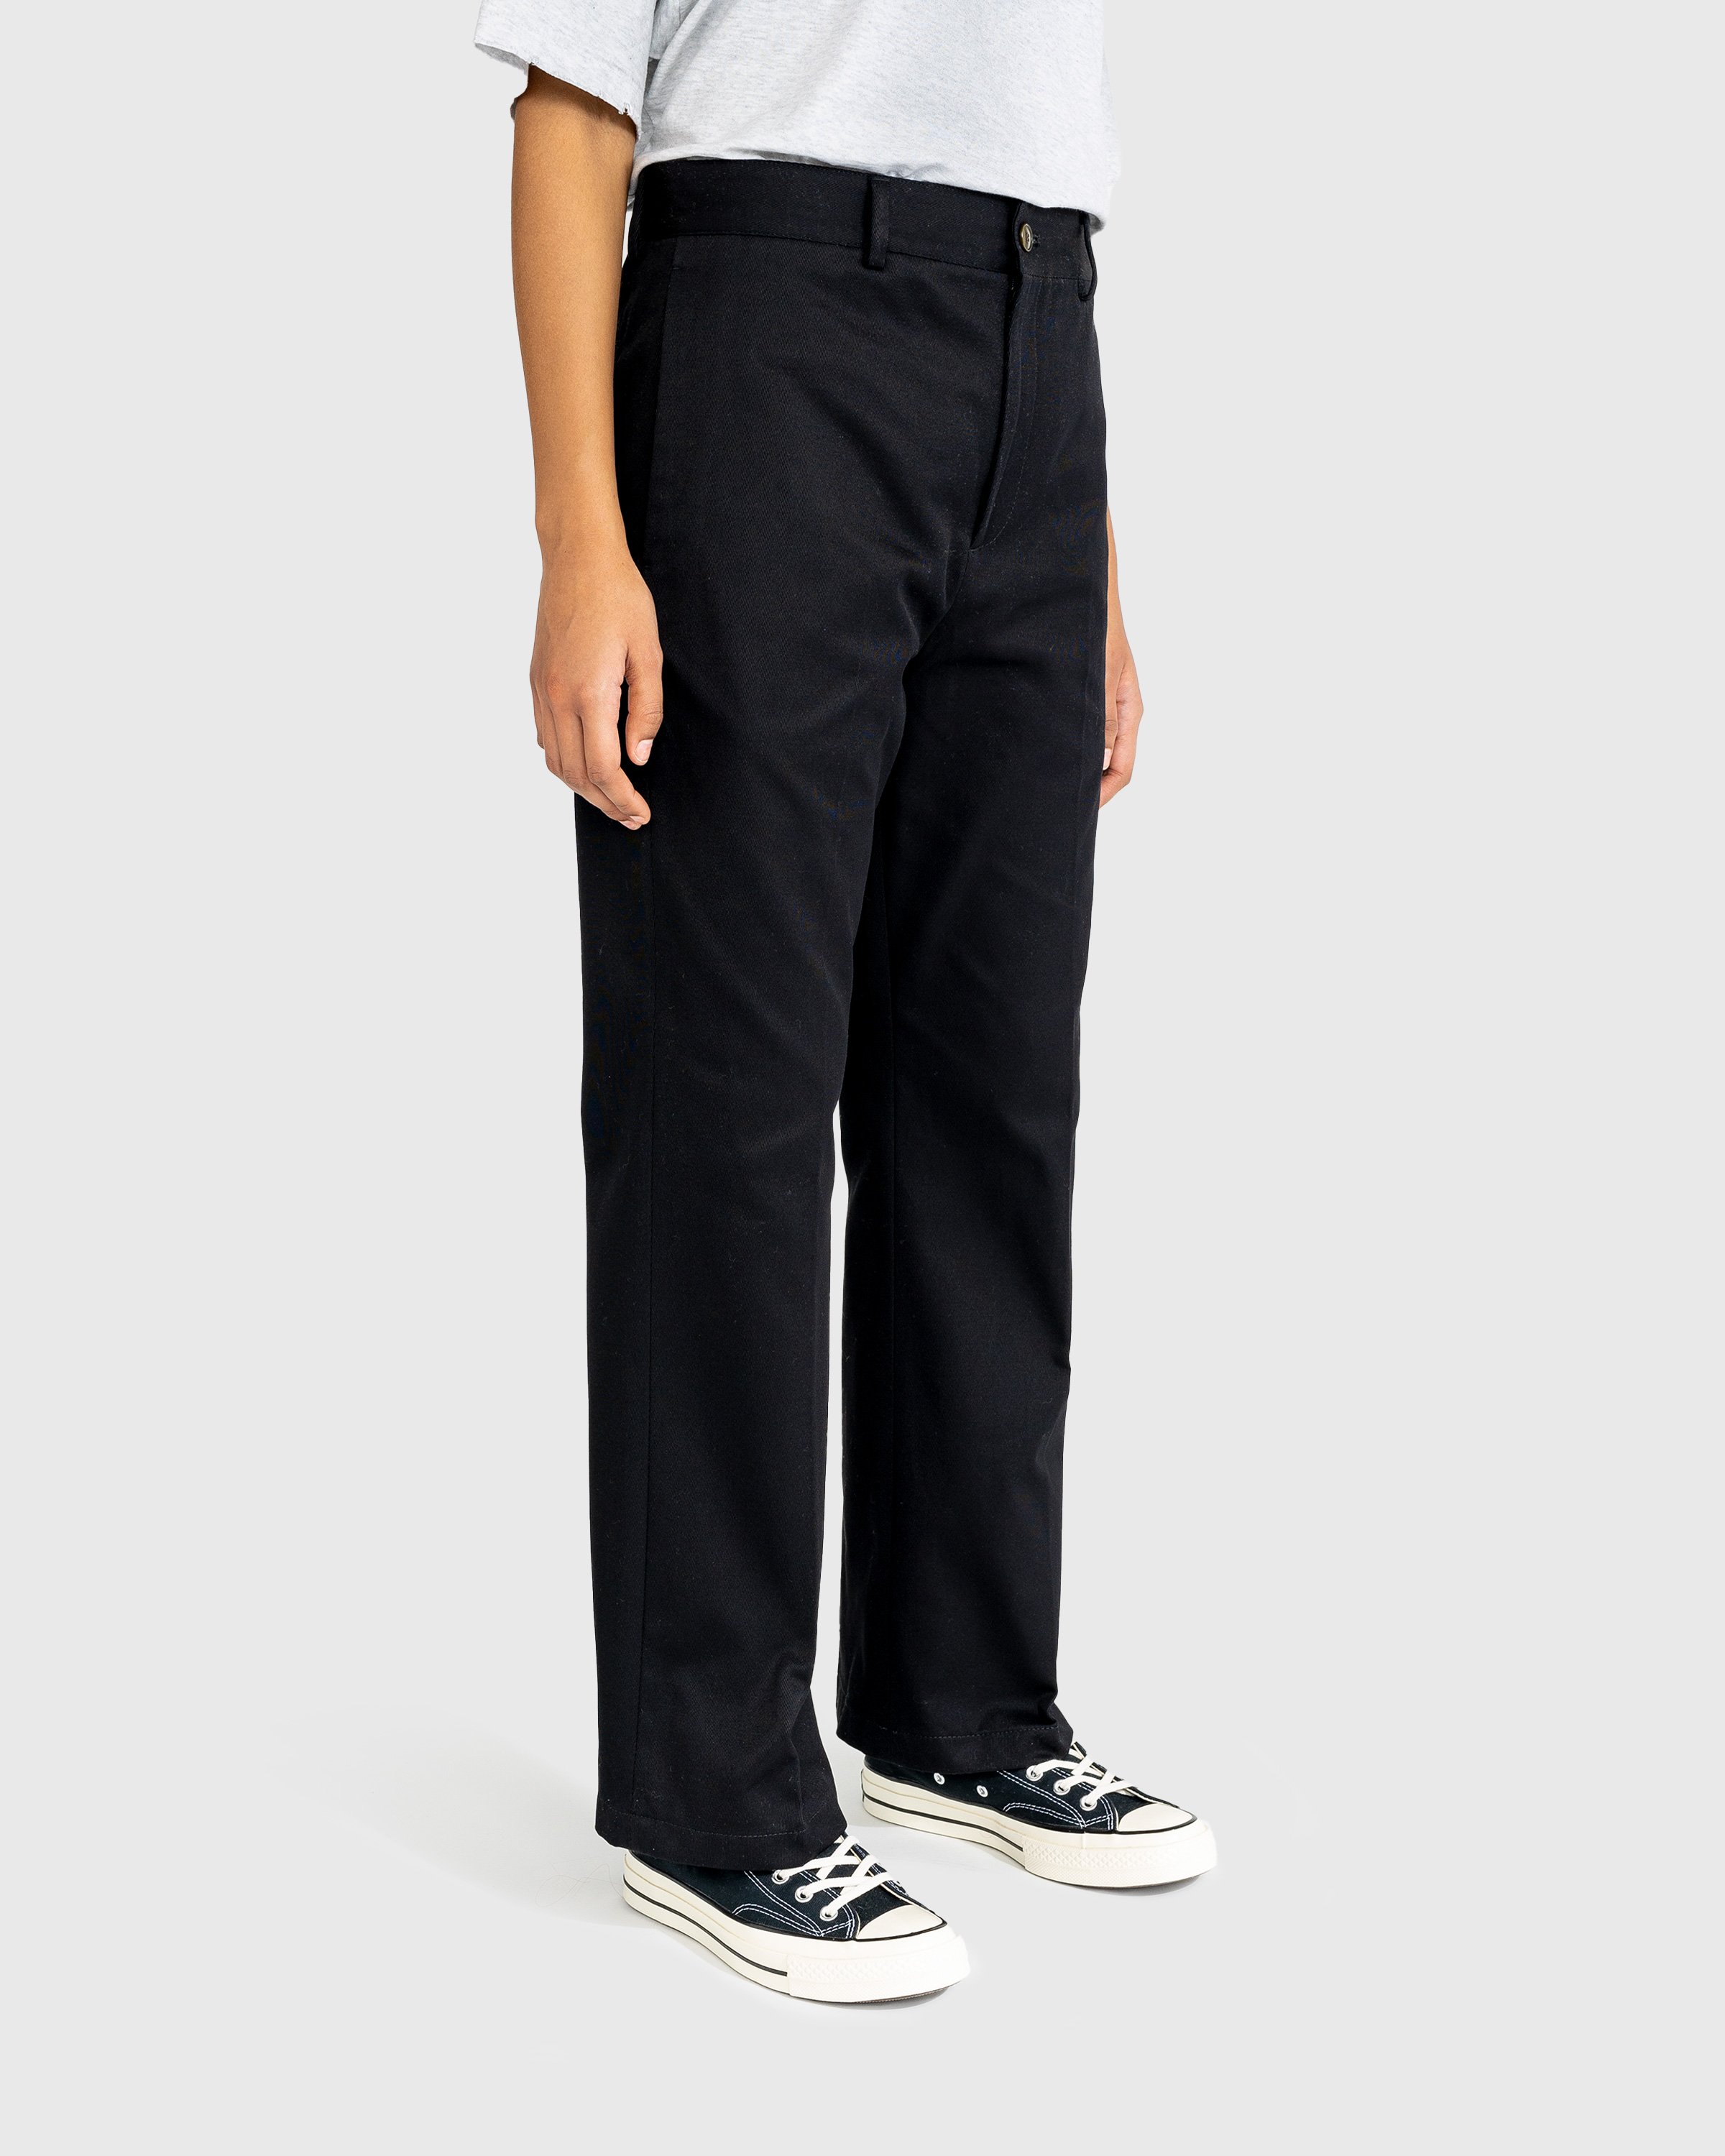 Acne Studios - Wool Blend Tailored Trousers Black - Clothing - Black - Image 4